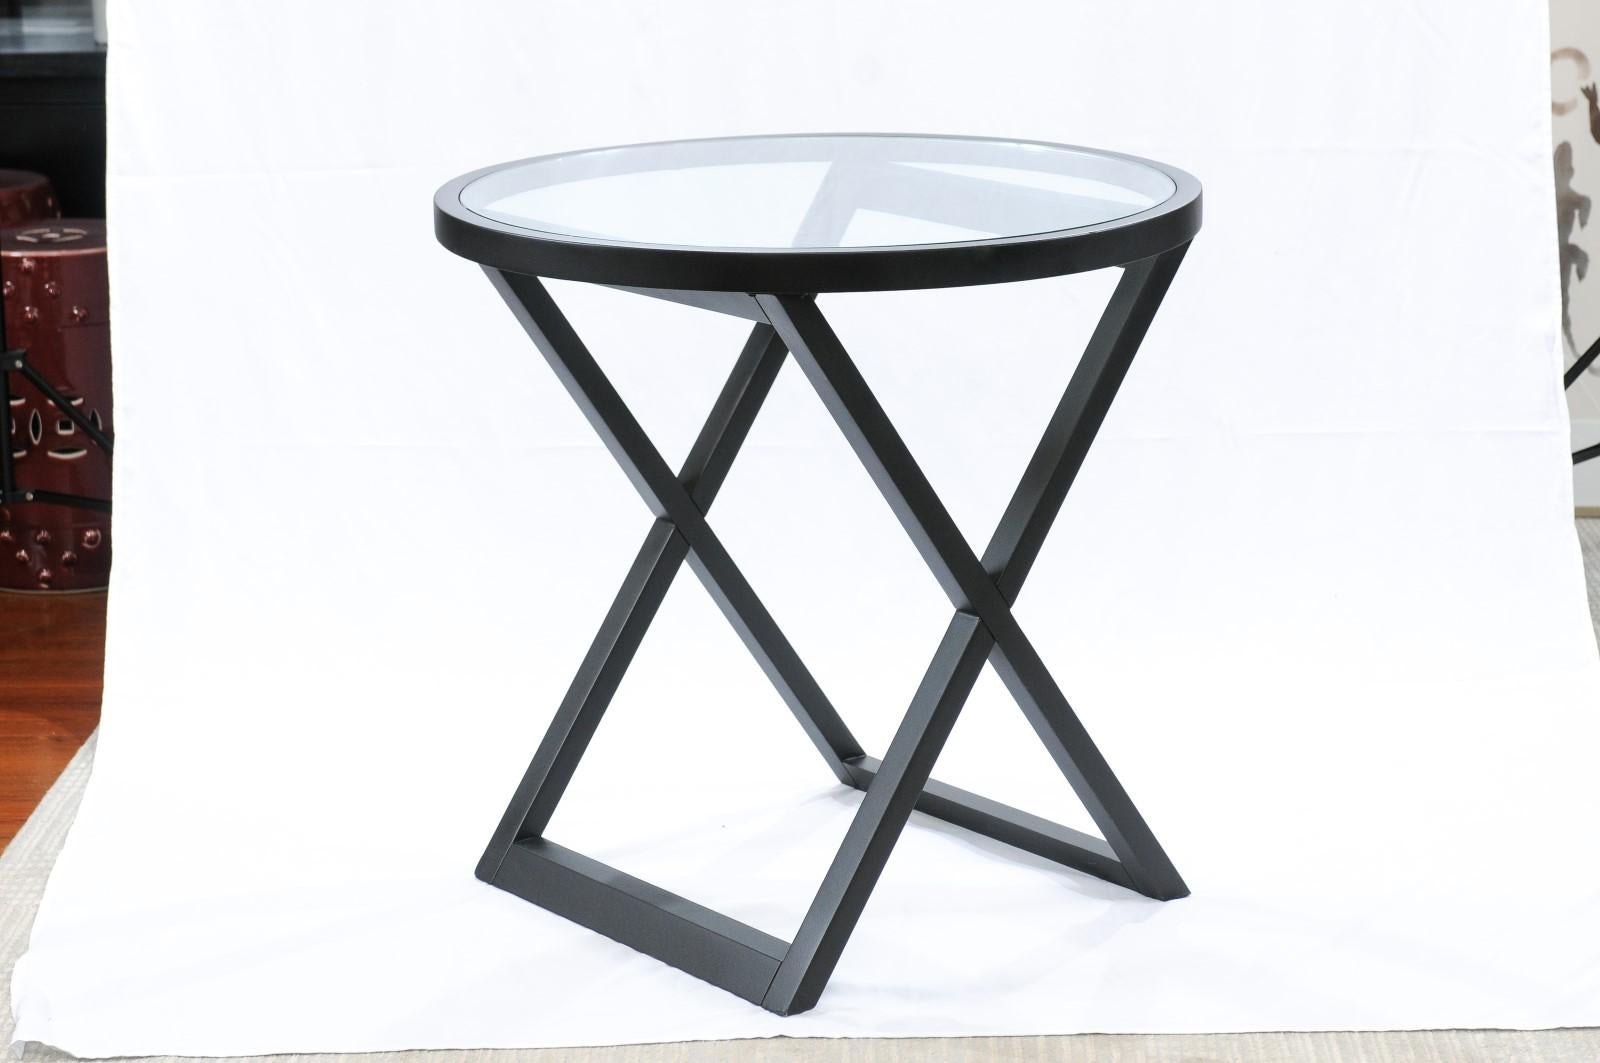 Ralph Lauren Mercer Street side table. A gorgeous round side table. The top wood frame is veneered in Wood painted black, which gives it a rather elegant sensibility. The glass top keeps the attention on the unique X-shaped base. It will make a